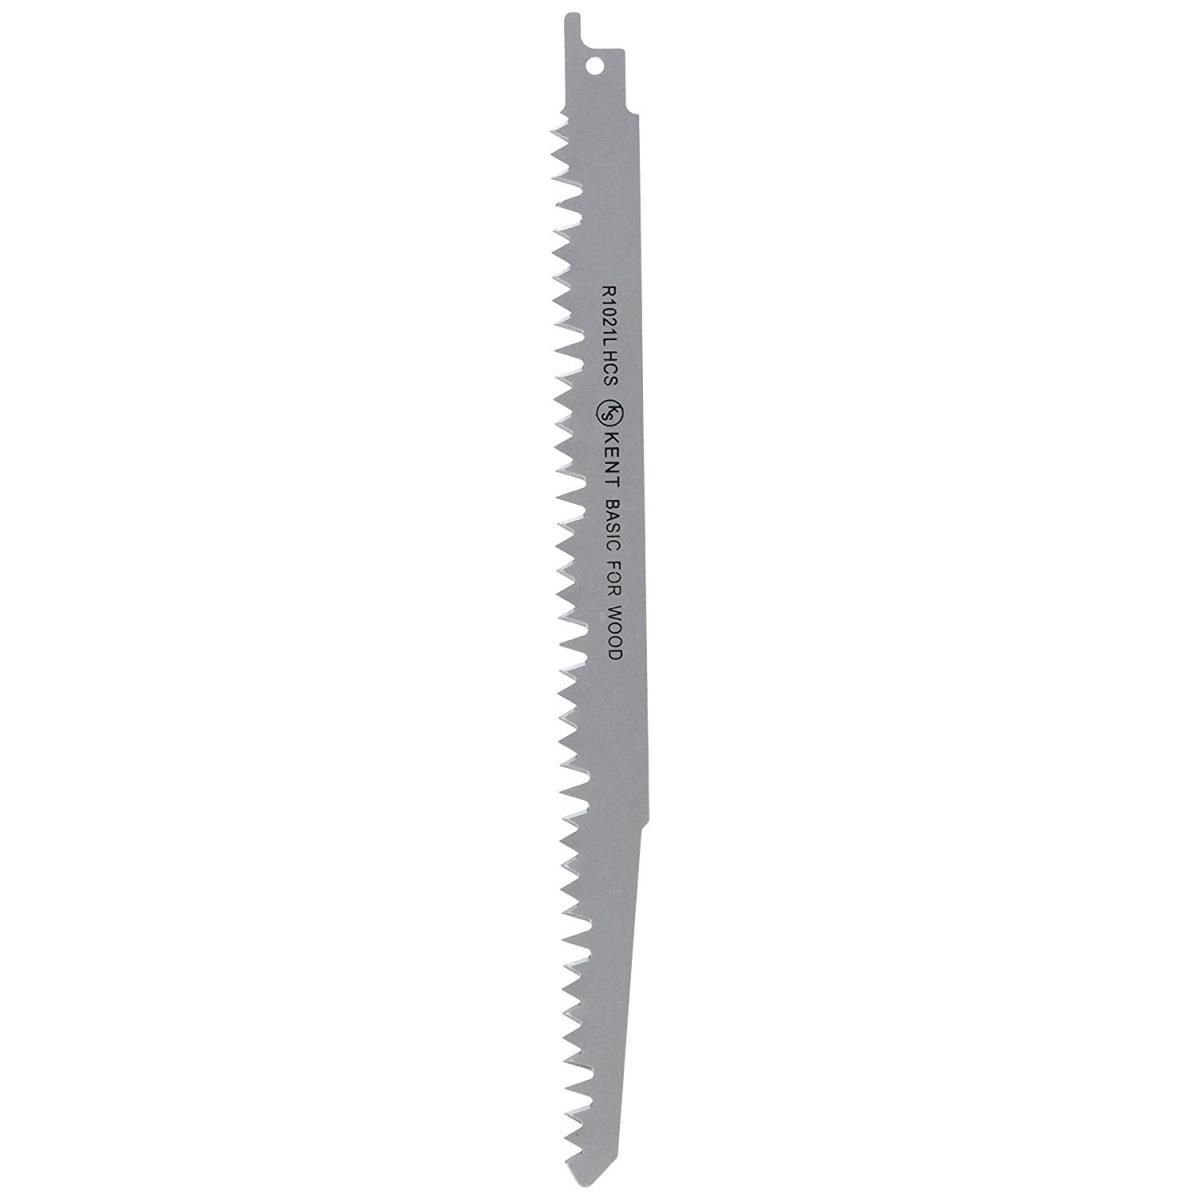 Image for Disston 255405 9 in. Master Mechanic High Carbon Steel Pruning Reciprocating Saw Blade at Kohl's.